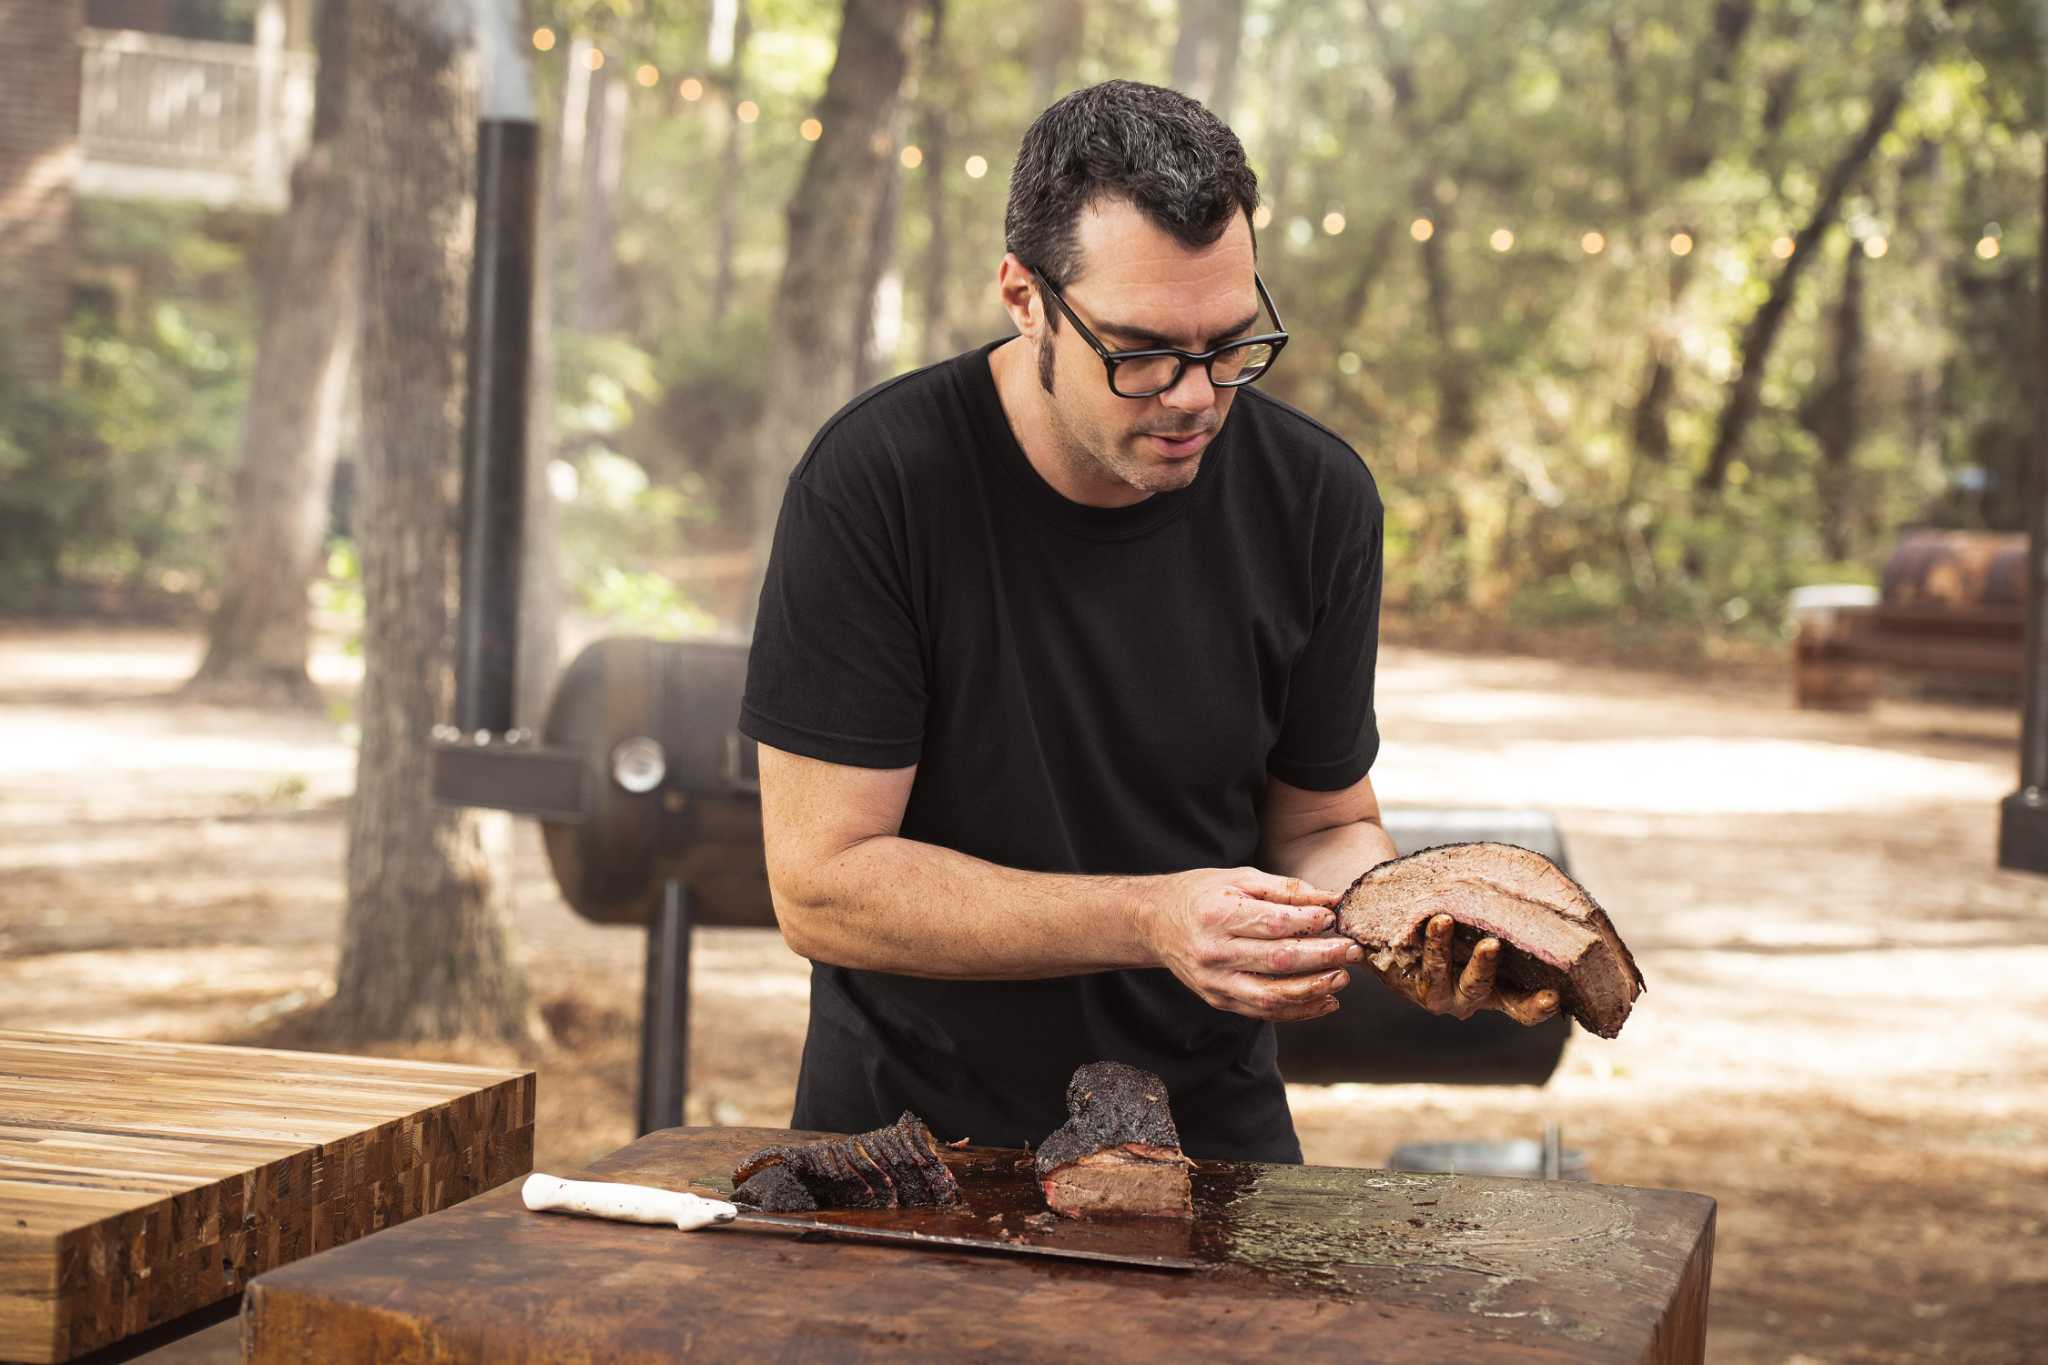 Today’s barbecue pitmasters are giving away their secrets. Here’s why